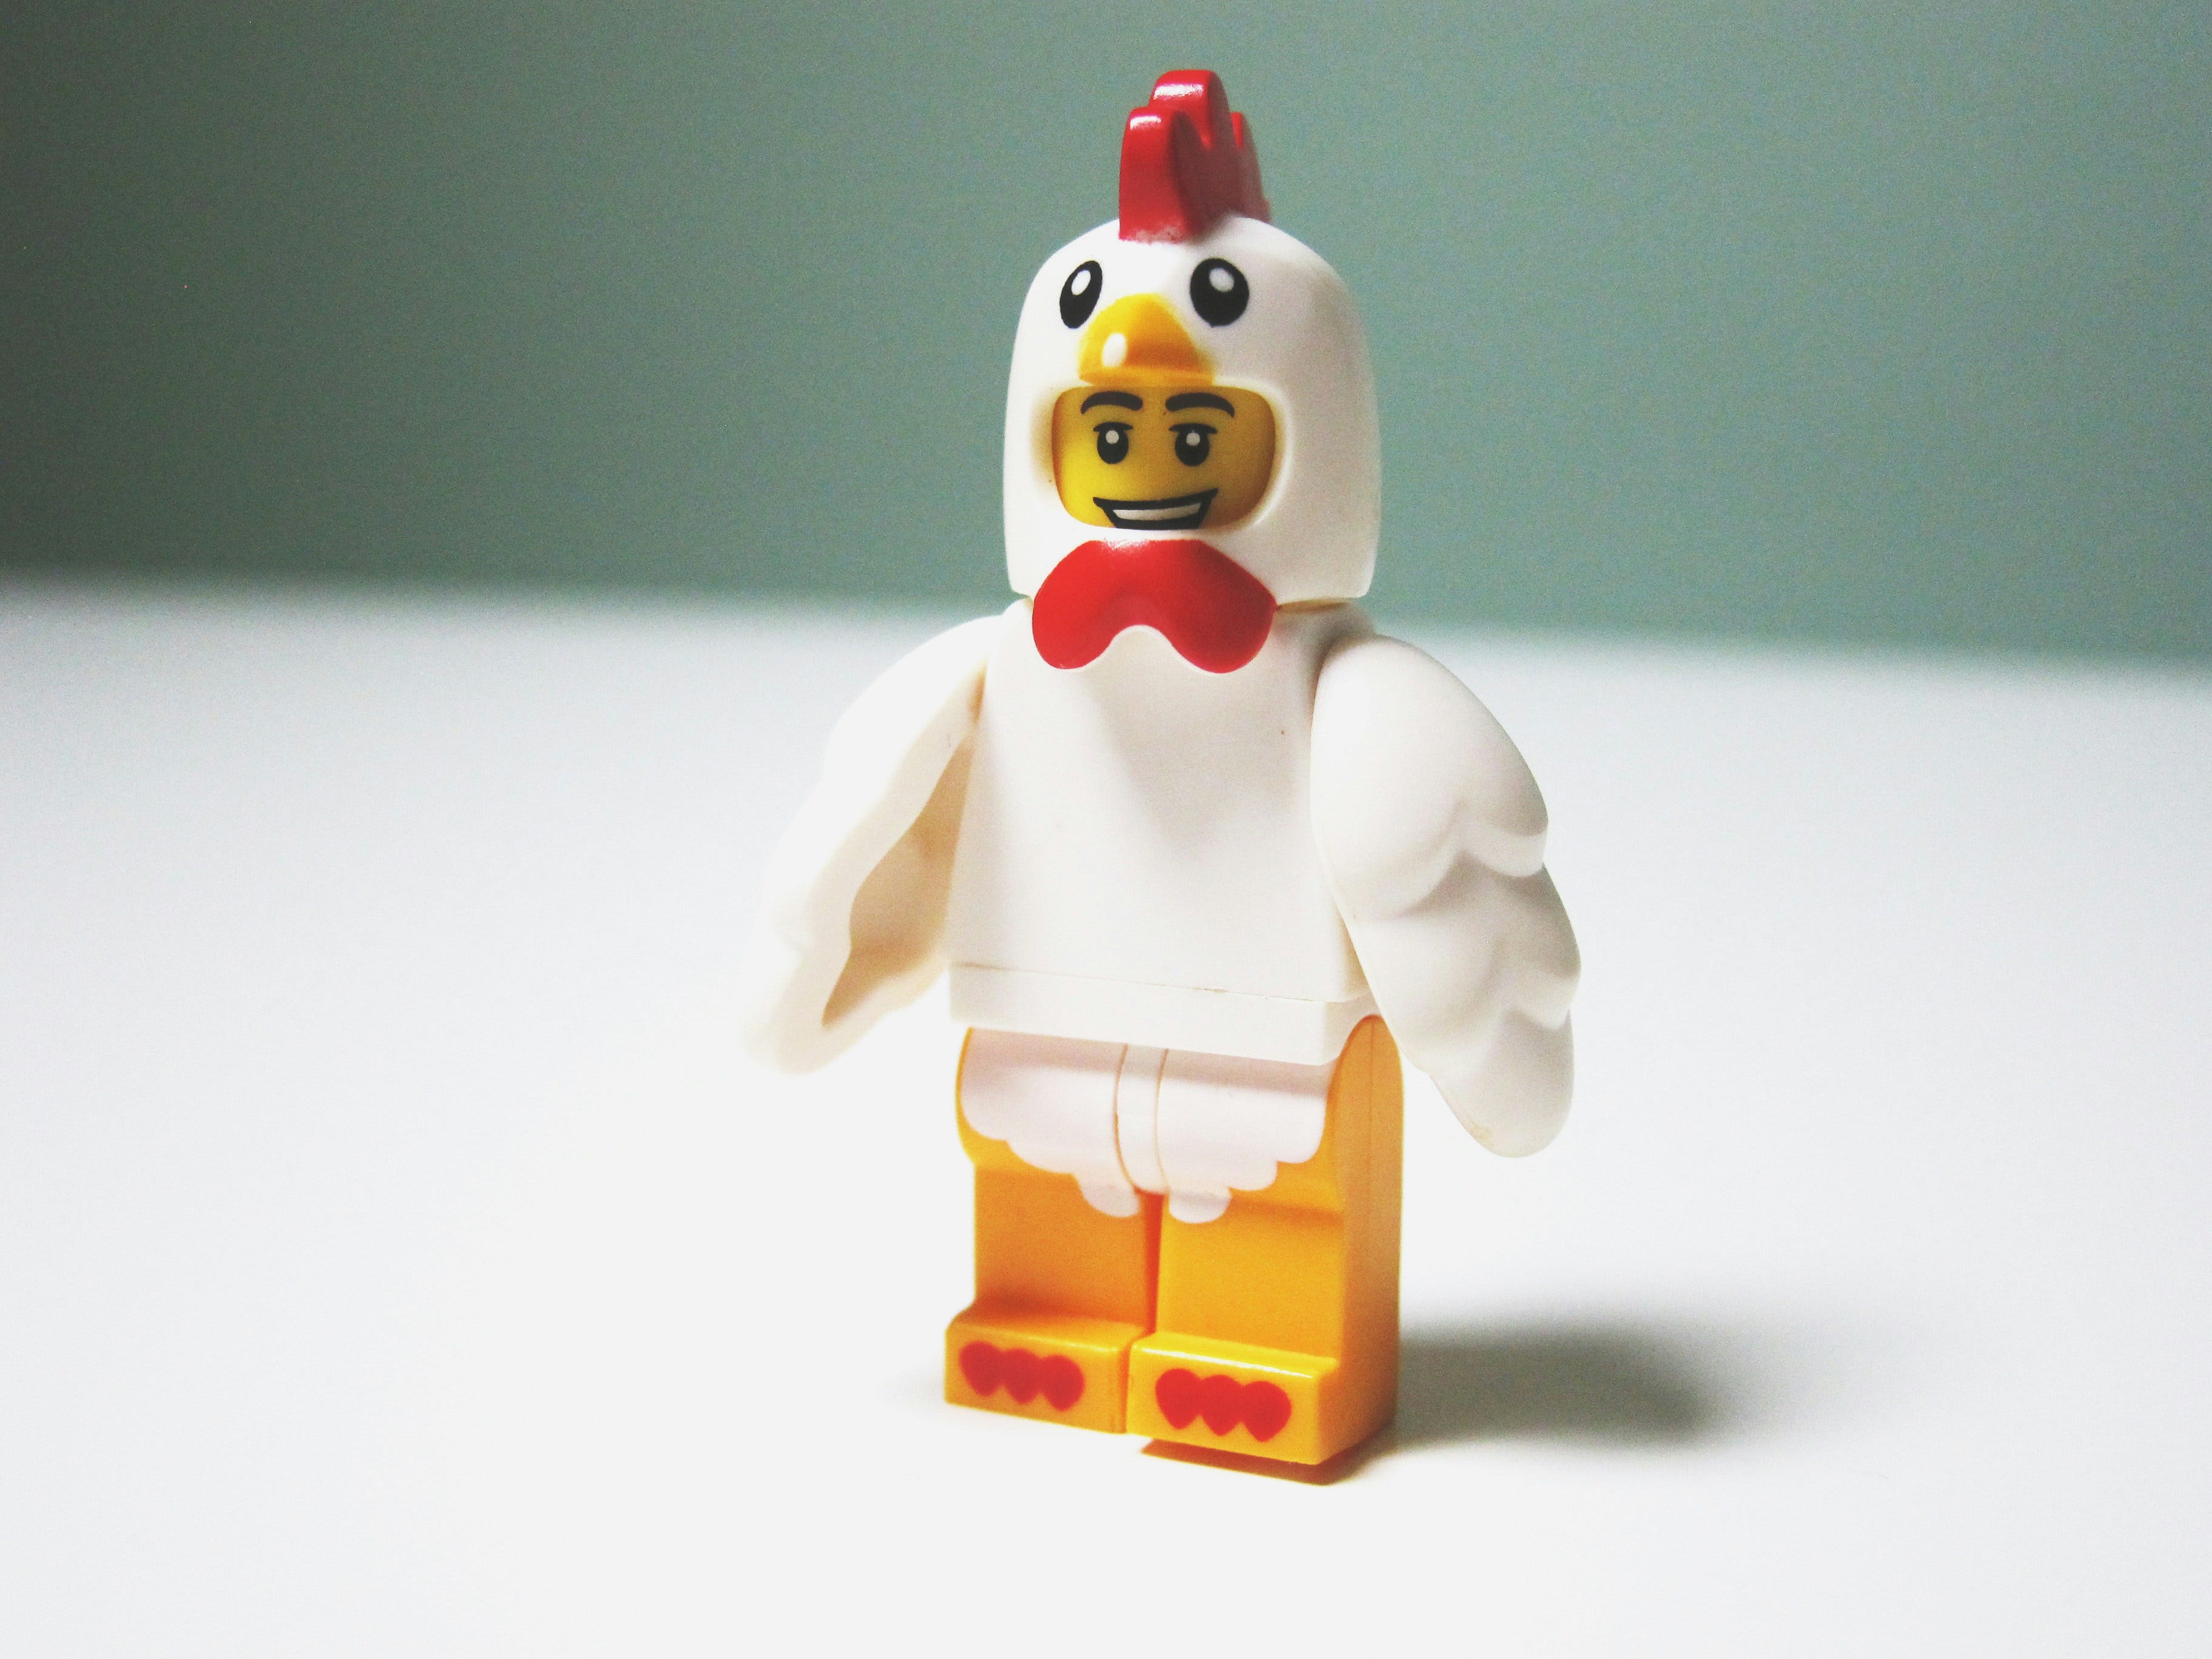 A smiling lego figure is wearing a chicken costume.